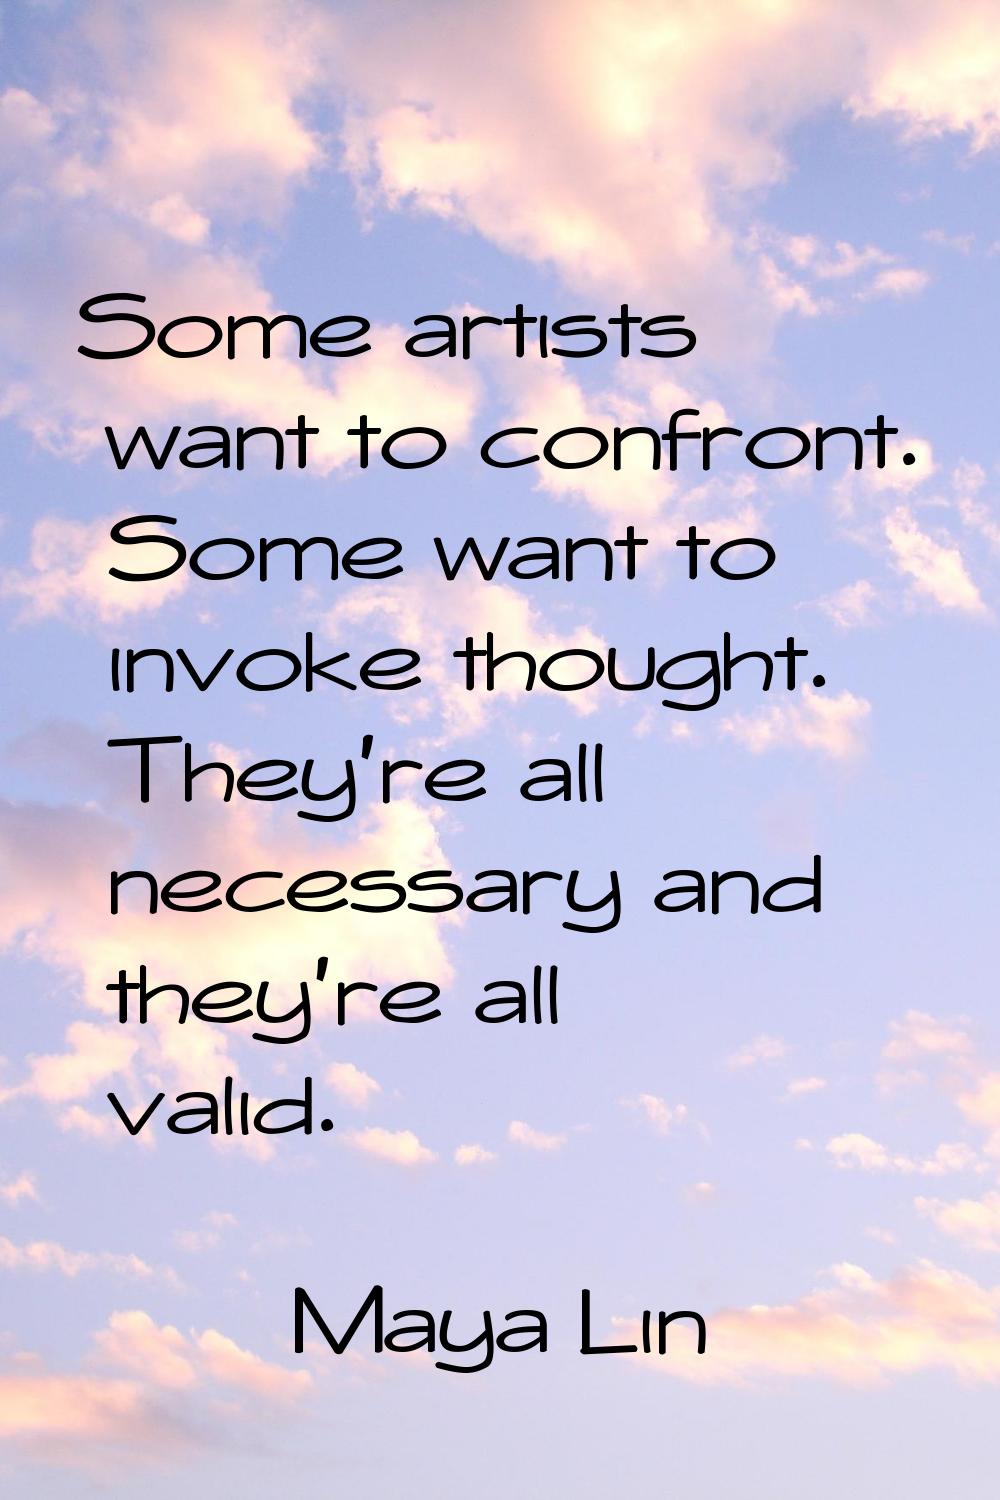 Some artists want to confront. Some want to invoke thought. They're all necessary and they're all v